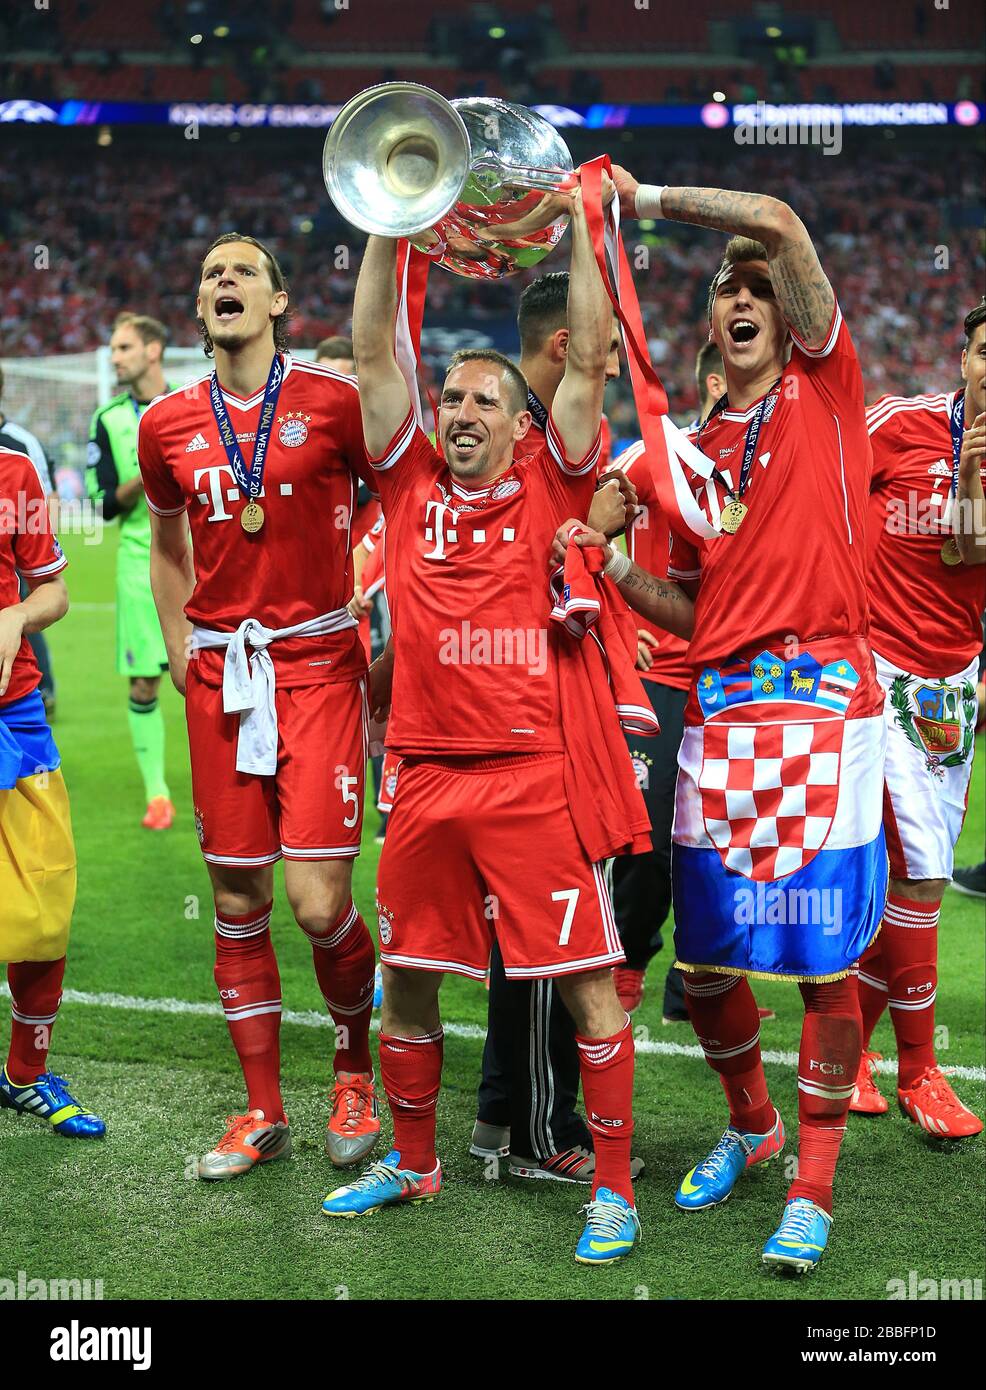 Bayern Munich's Franck Ribery celebrates with the Champions League trophy on the pitch Stock Photo